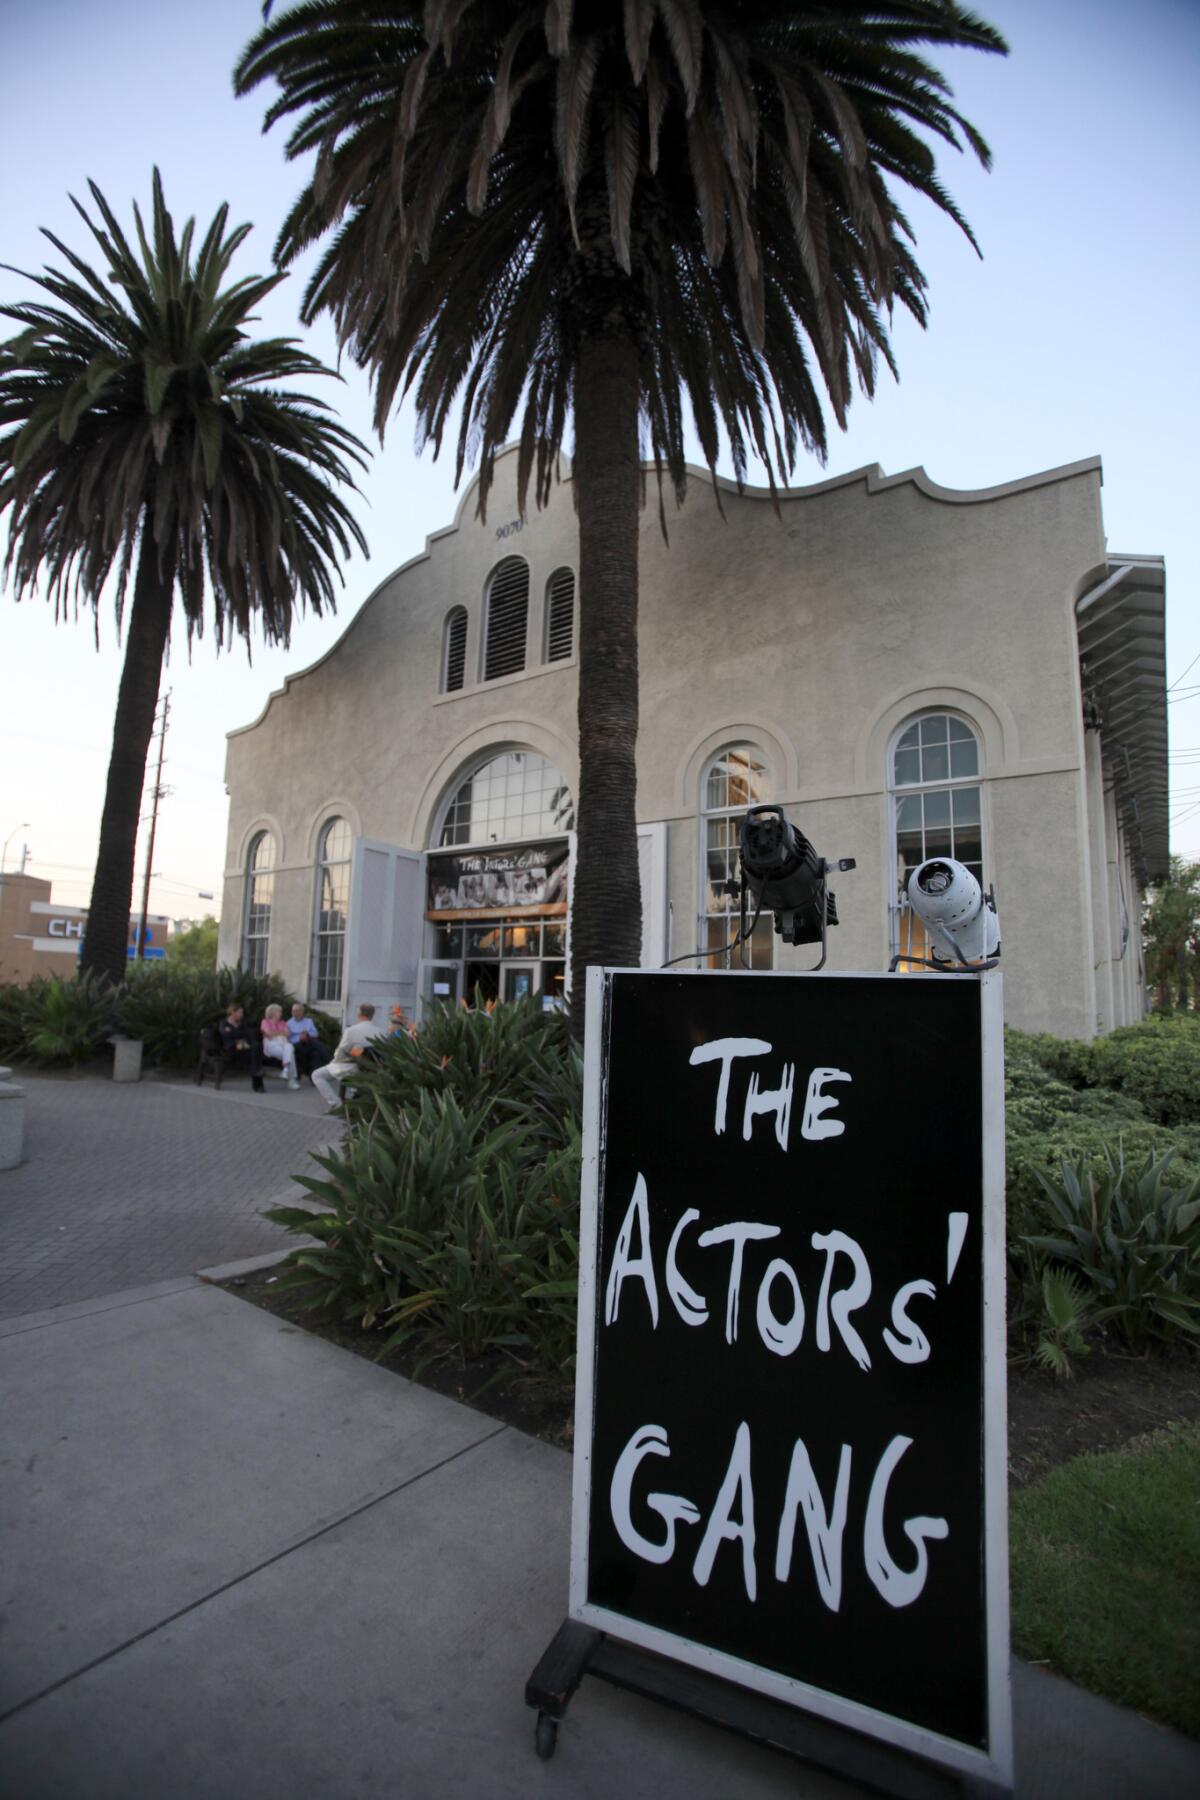 The Actors' Gang is producing "A Midsummer's Night's Dream" at the Ivy Substation in Culver City.